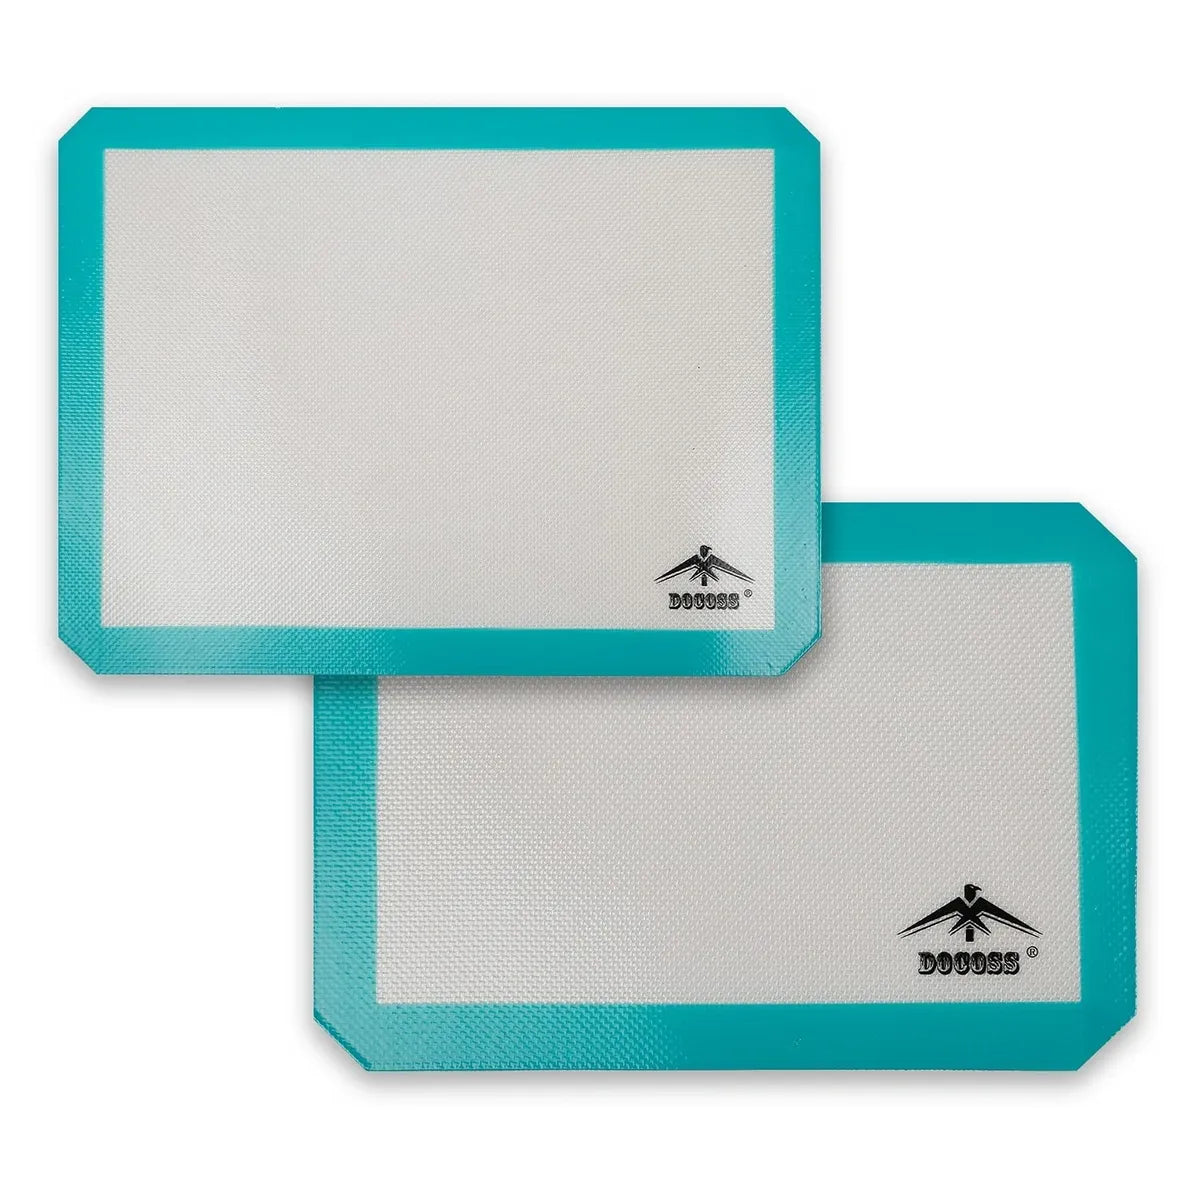 DOCOSS Pack Of 2 Small Silicone Oven Baking Mat Professional Silicon Mat For Baking Non Stick Silicon Mat For Oven Baking Sheet (11.5 " x 8.5 "Inch ) (Turquoise)